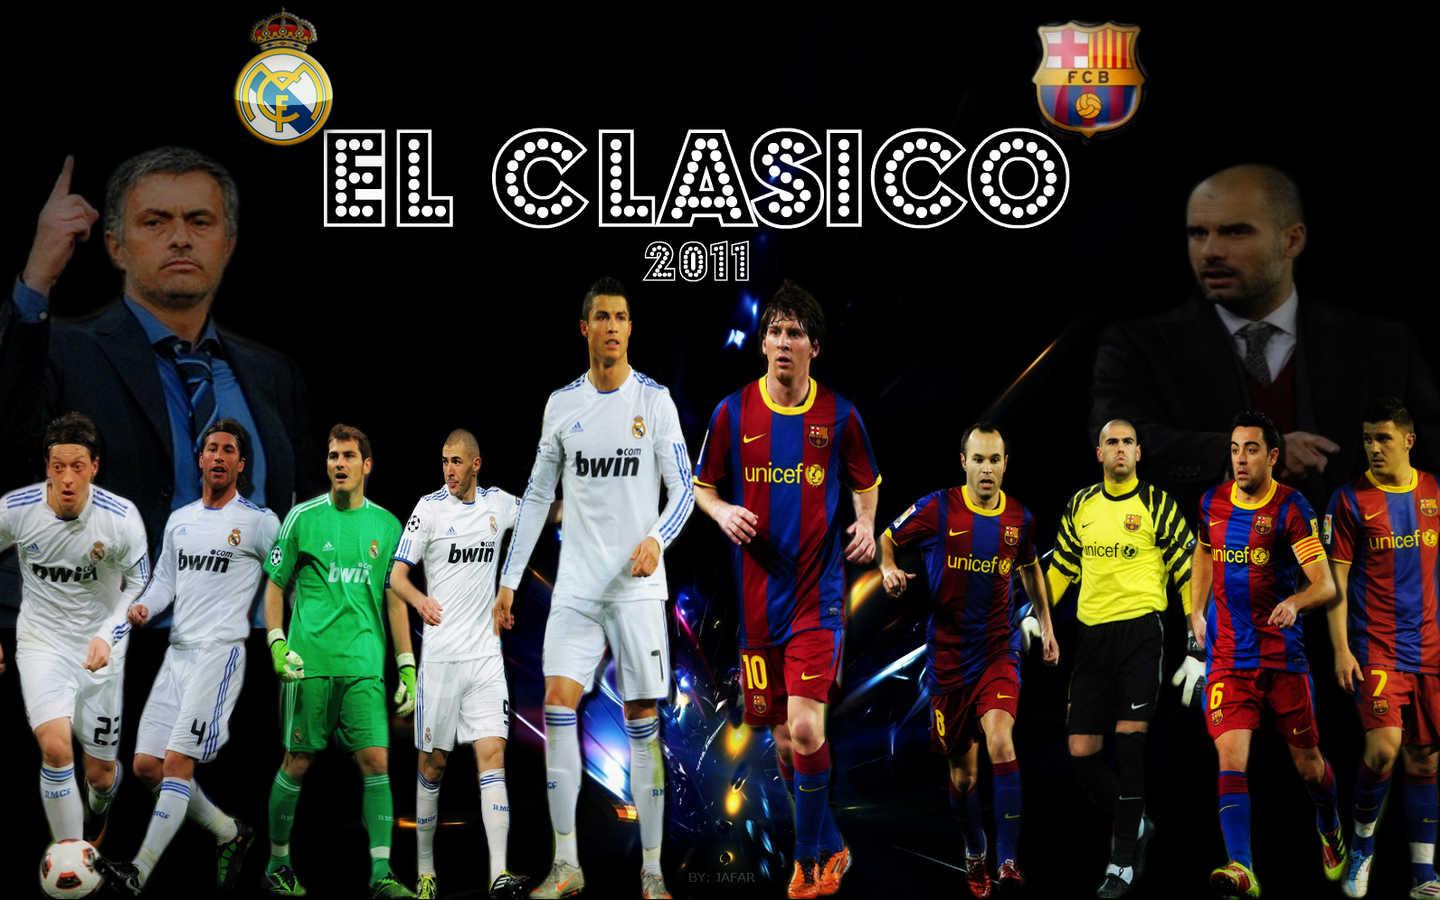 entries in Real Madrid Vs Barcelona Wallpaper group